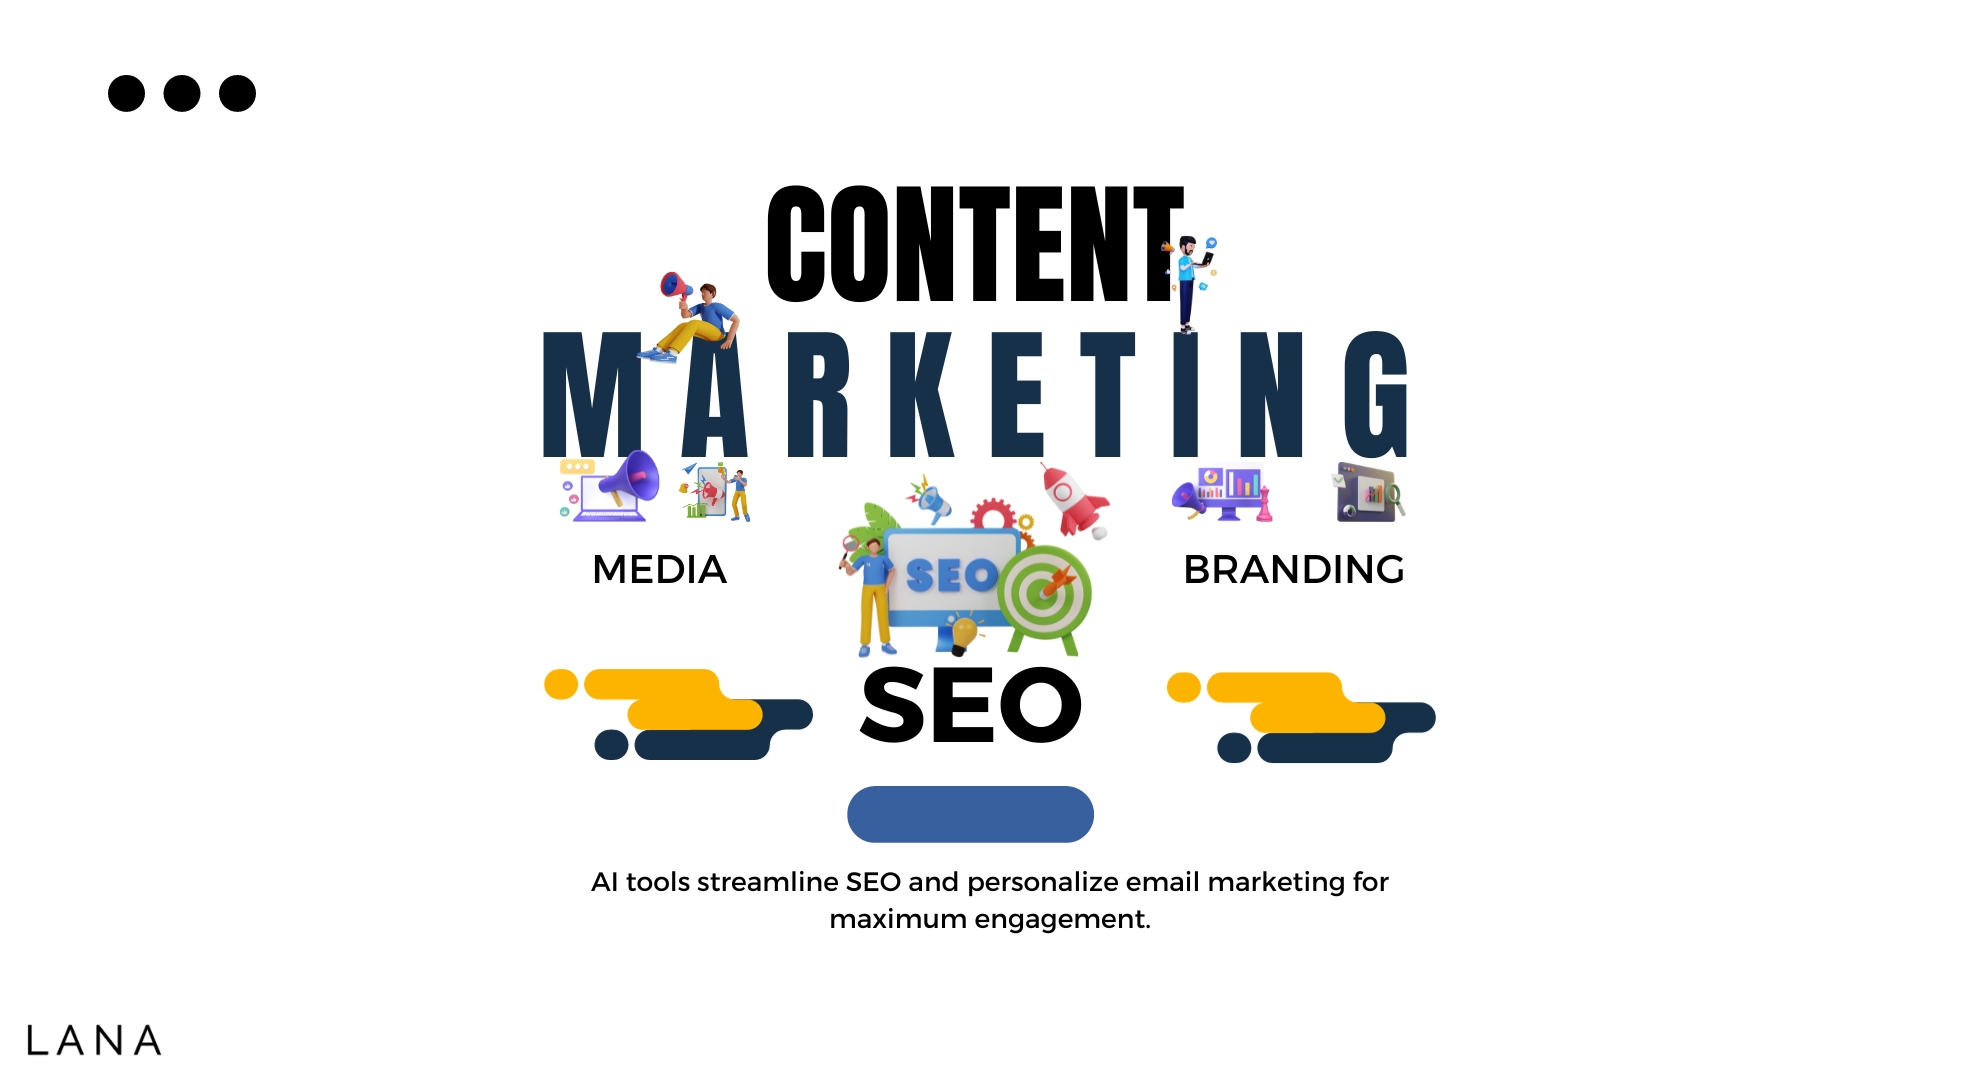 Content Marketing Automation and SEO